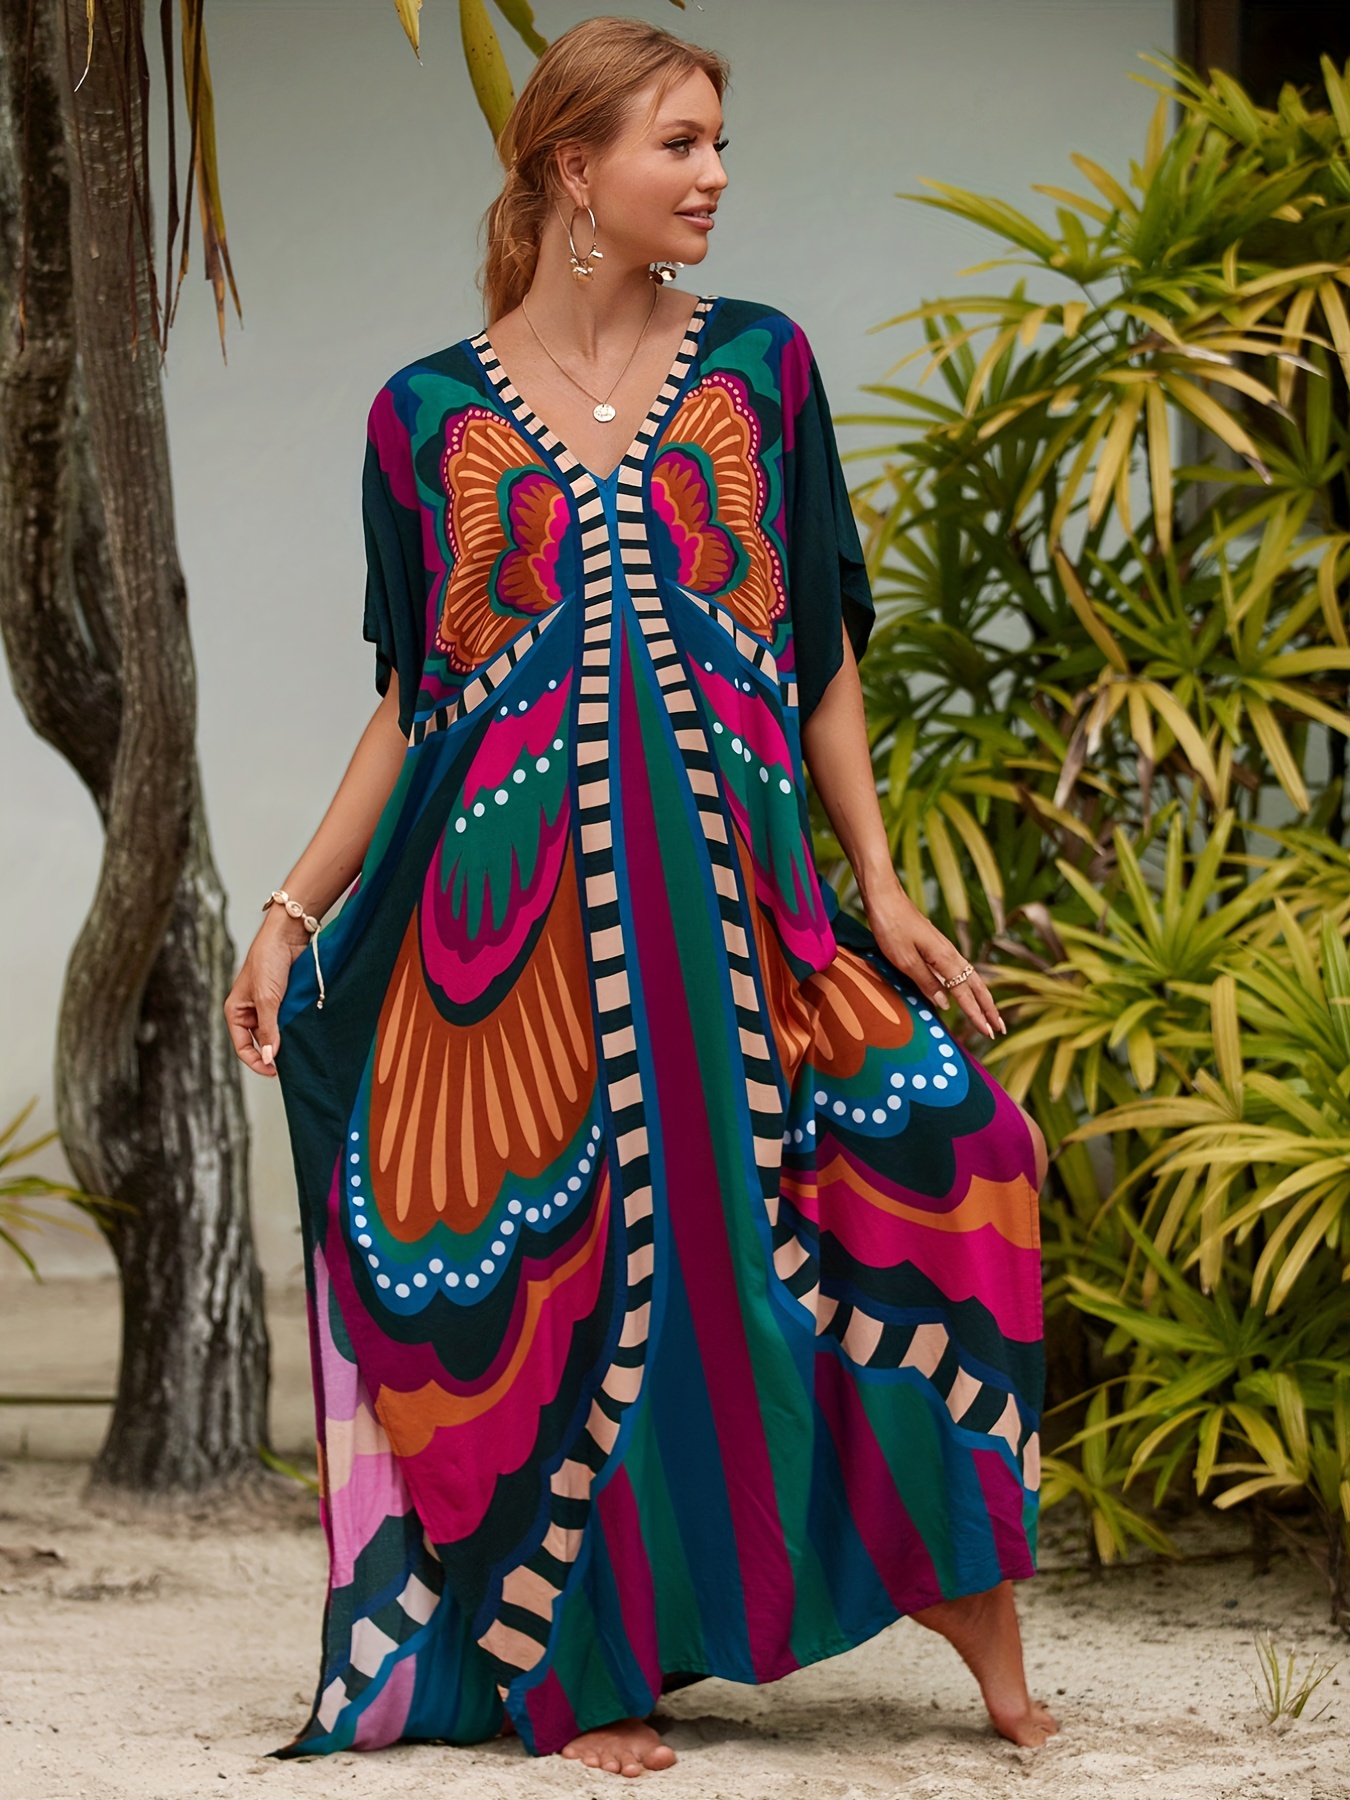 Plus Size Boho Cover Up Dress - Butterfly Print - Shop Our Store